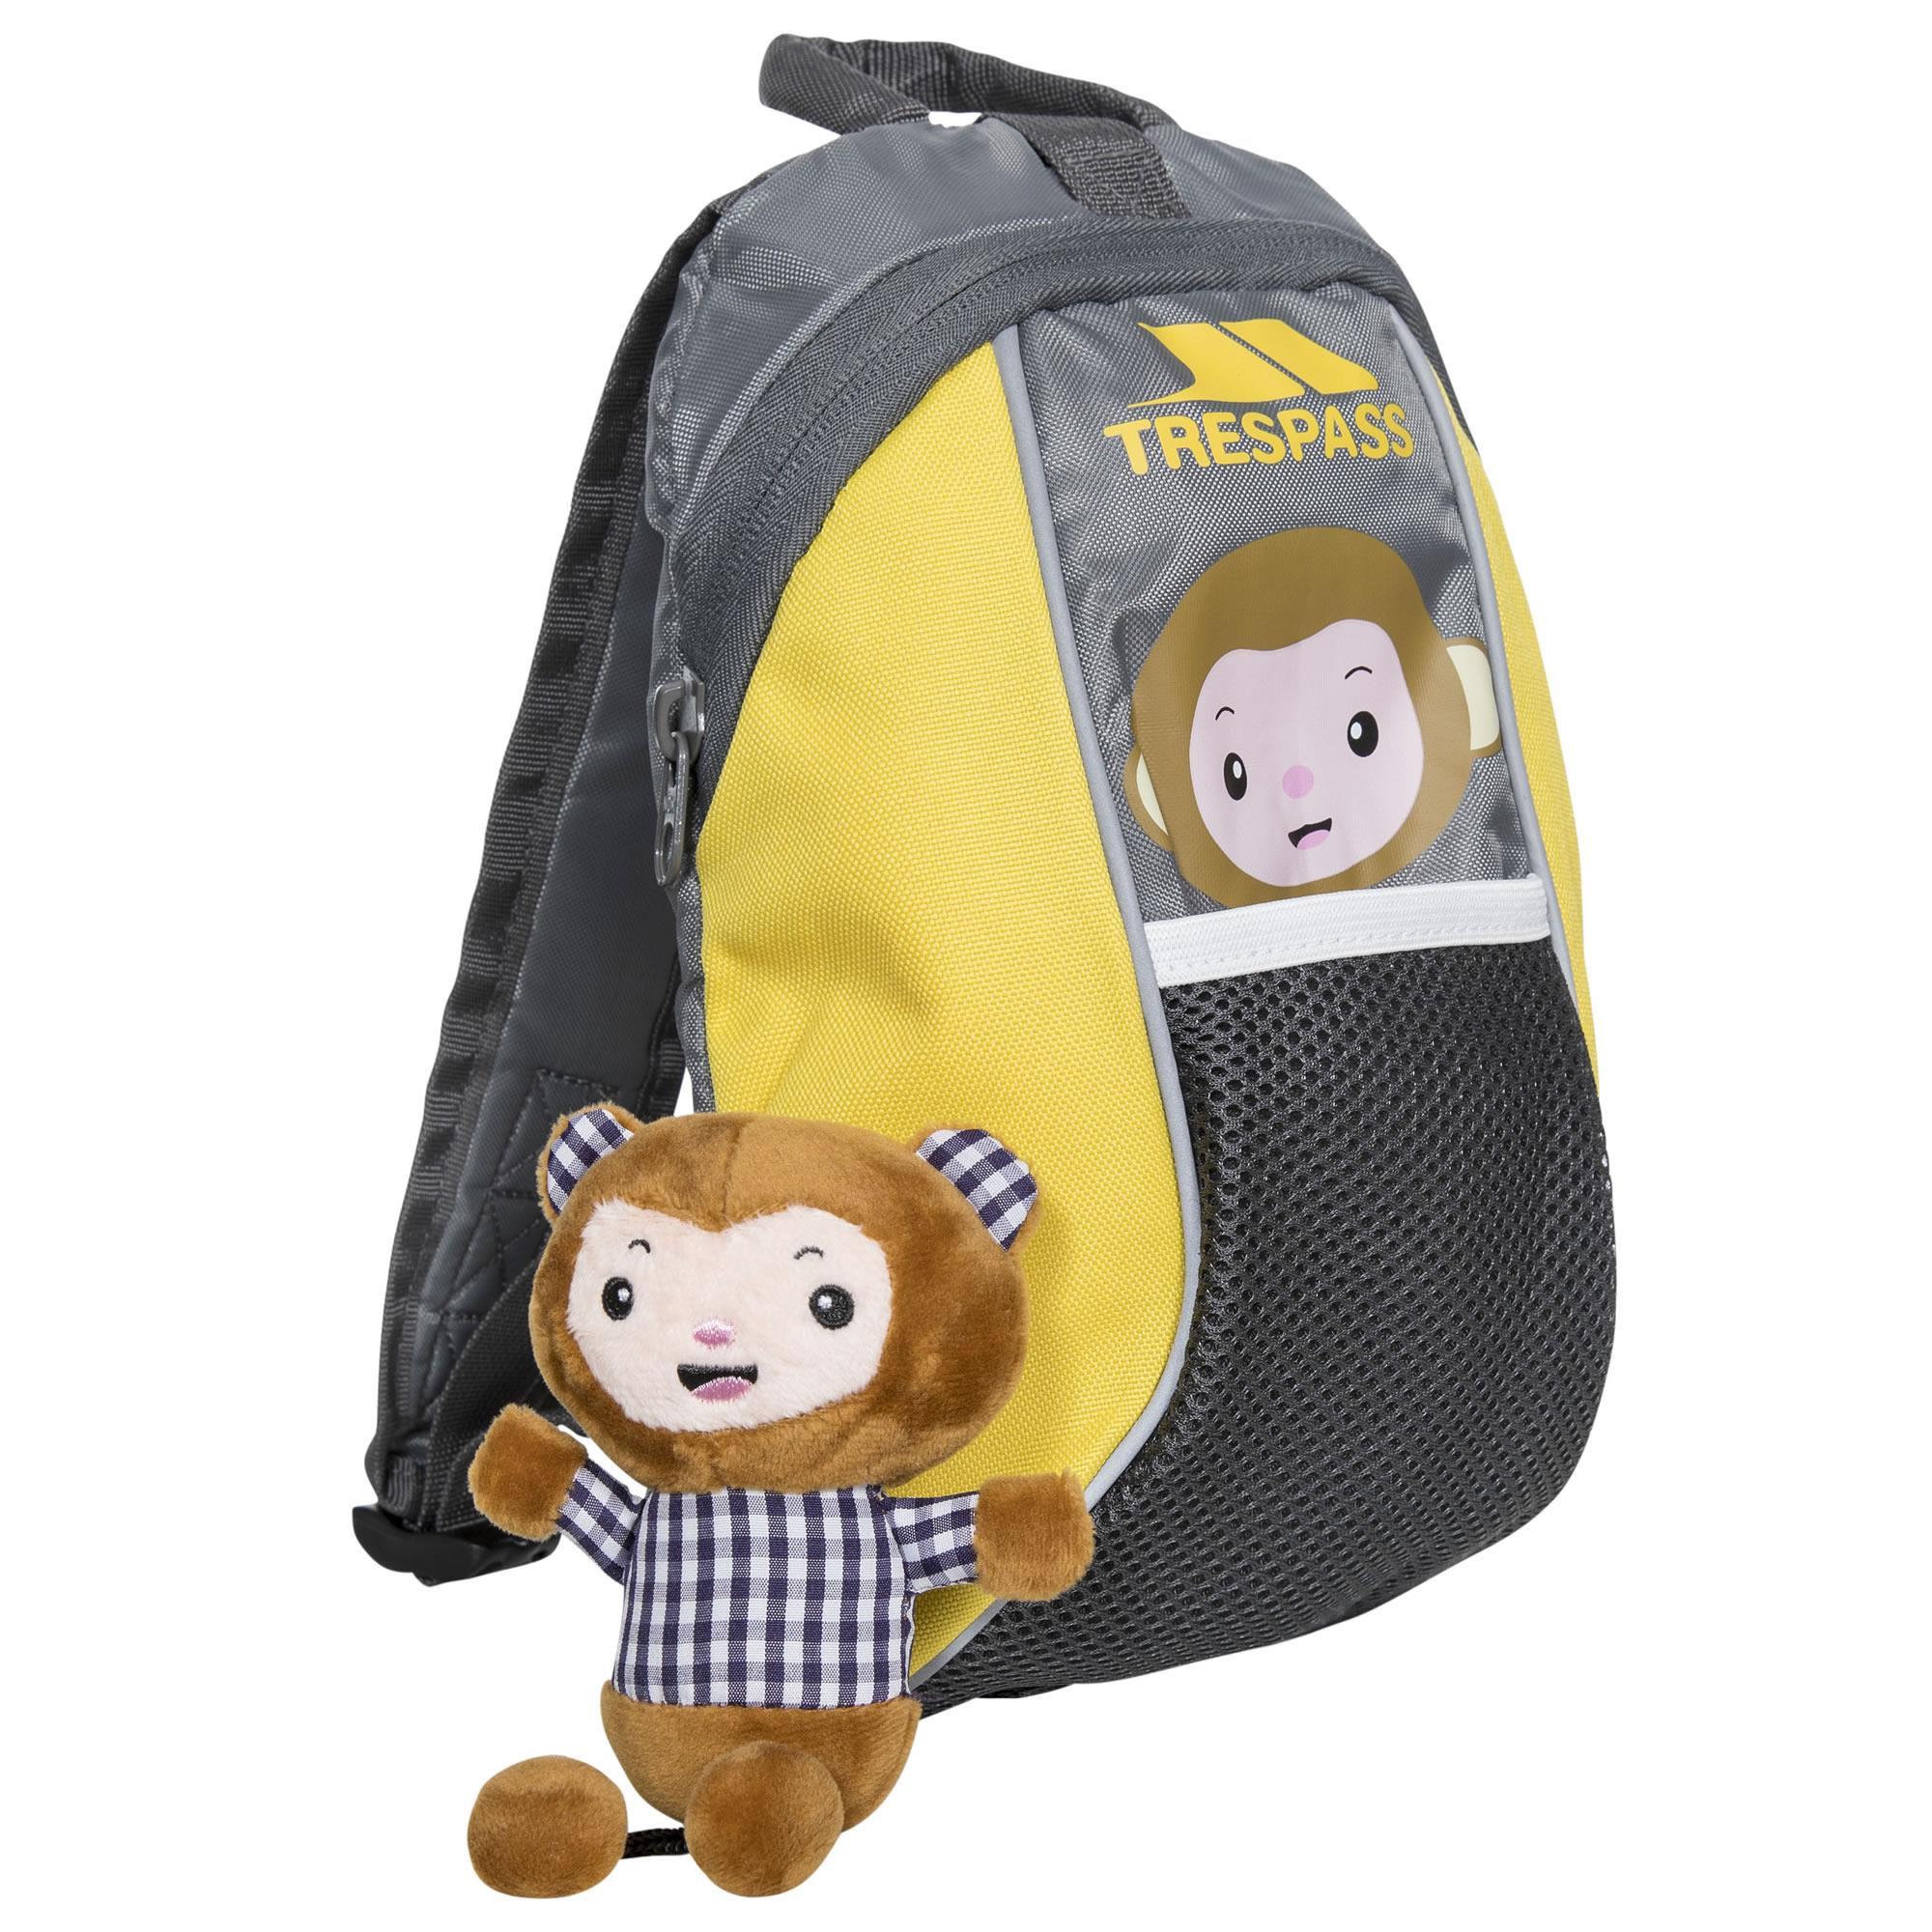 Argos Product Support for Trespass Tiger Reins Backpack (339/6591)